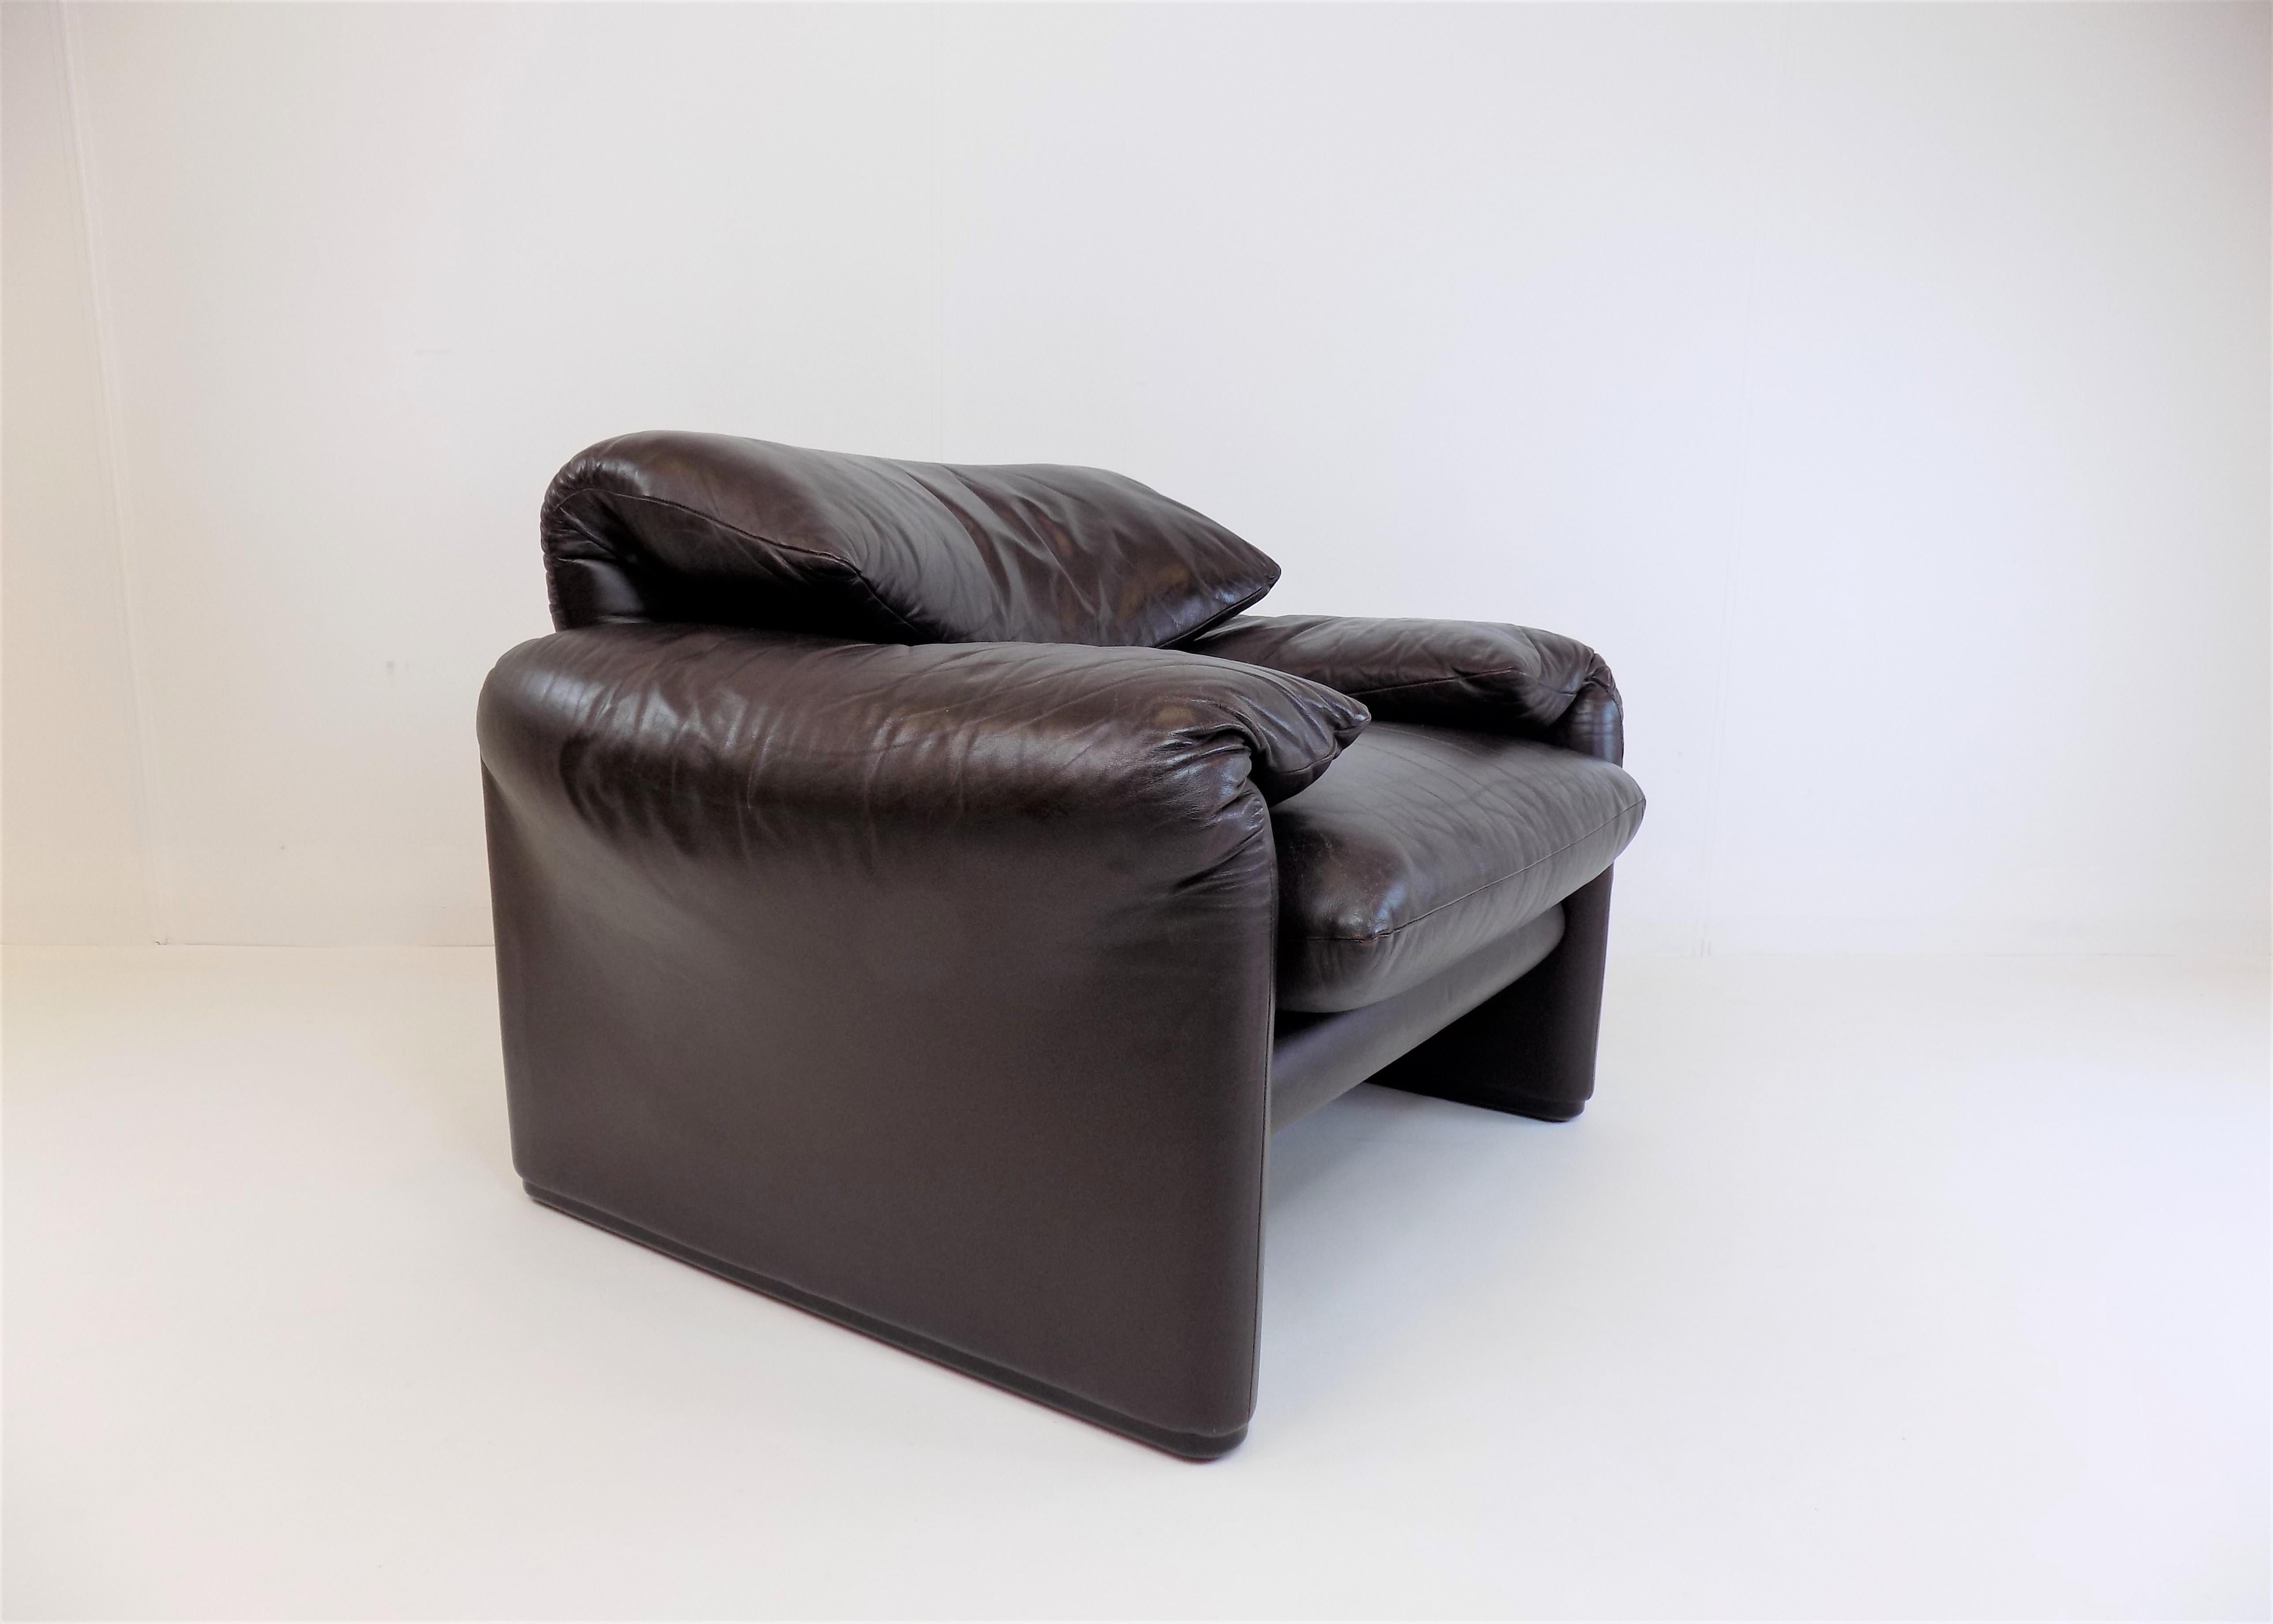 This dark brown Maralunga from the 1970s is in very good condition. The armrests of the armchair show slight signs of wear on the leather, otherwise the leather is in perfect condition. The joints of the backrest are stable and work perfectly. 

